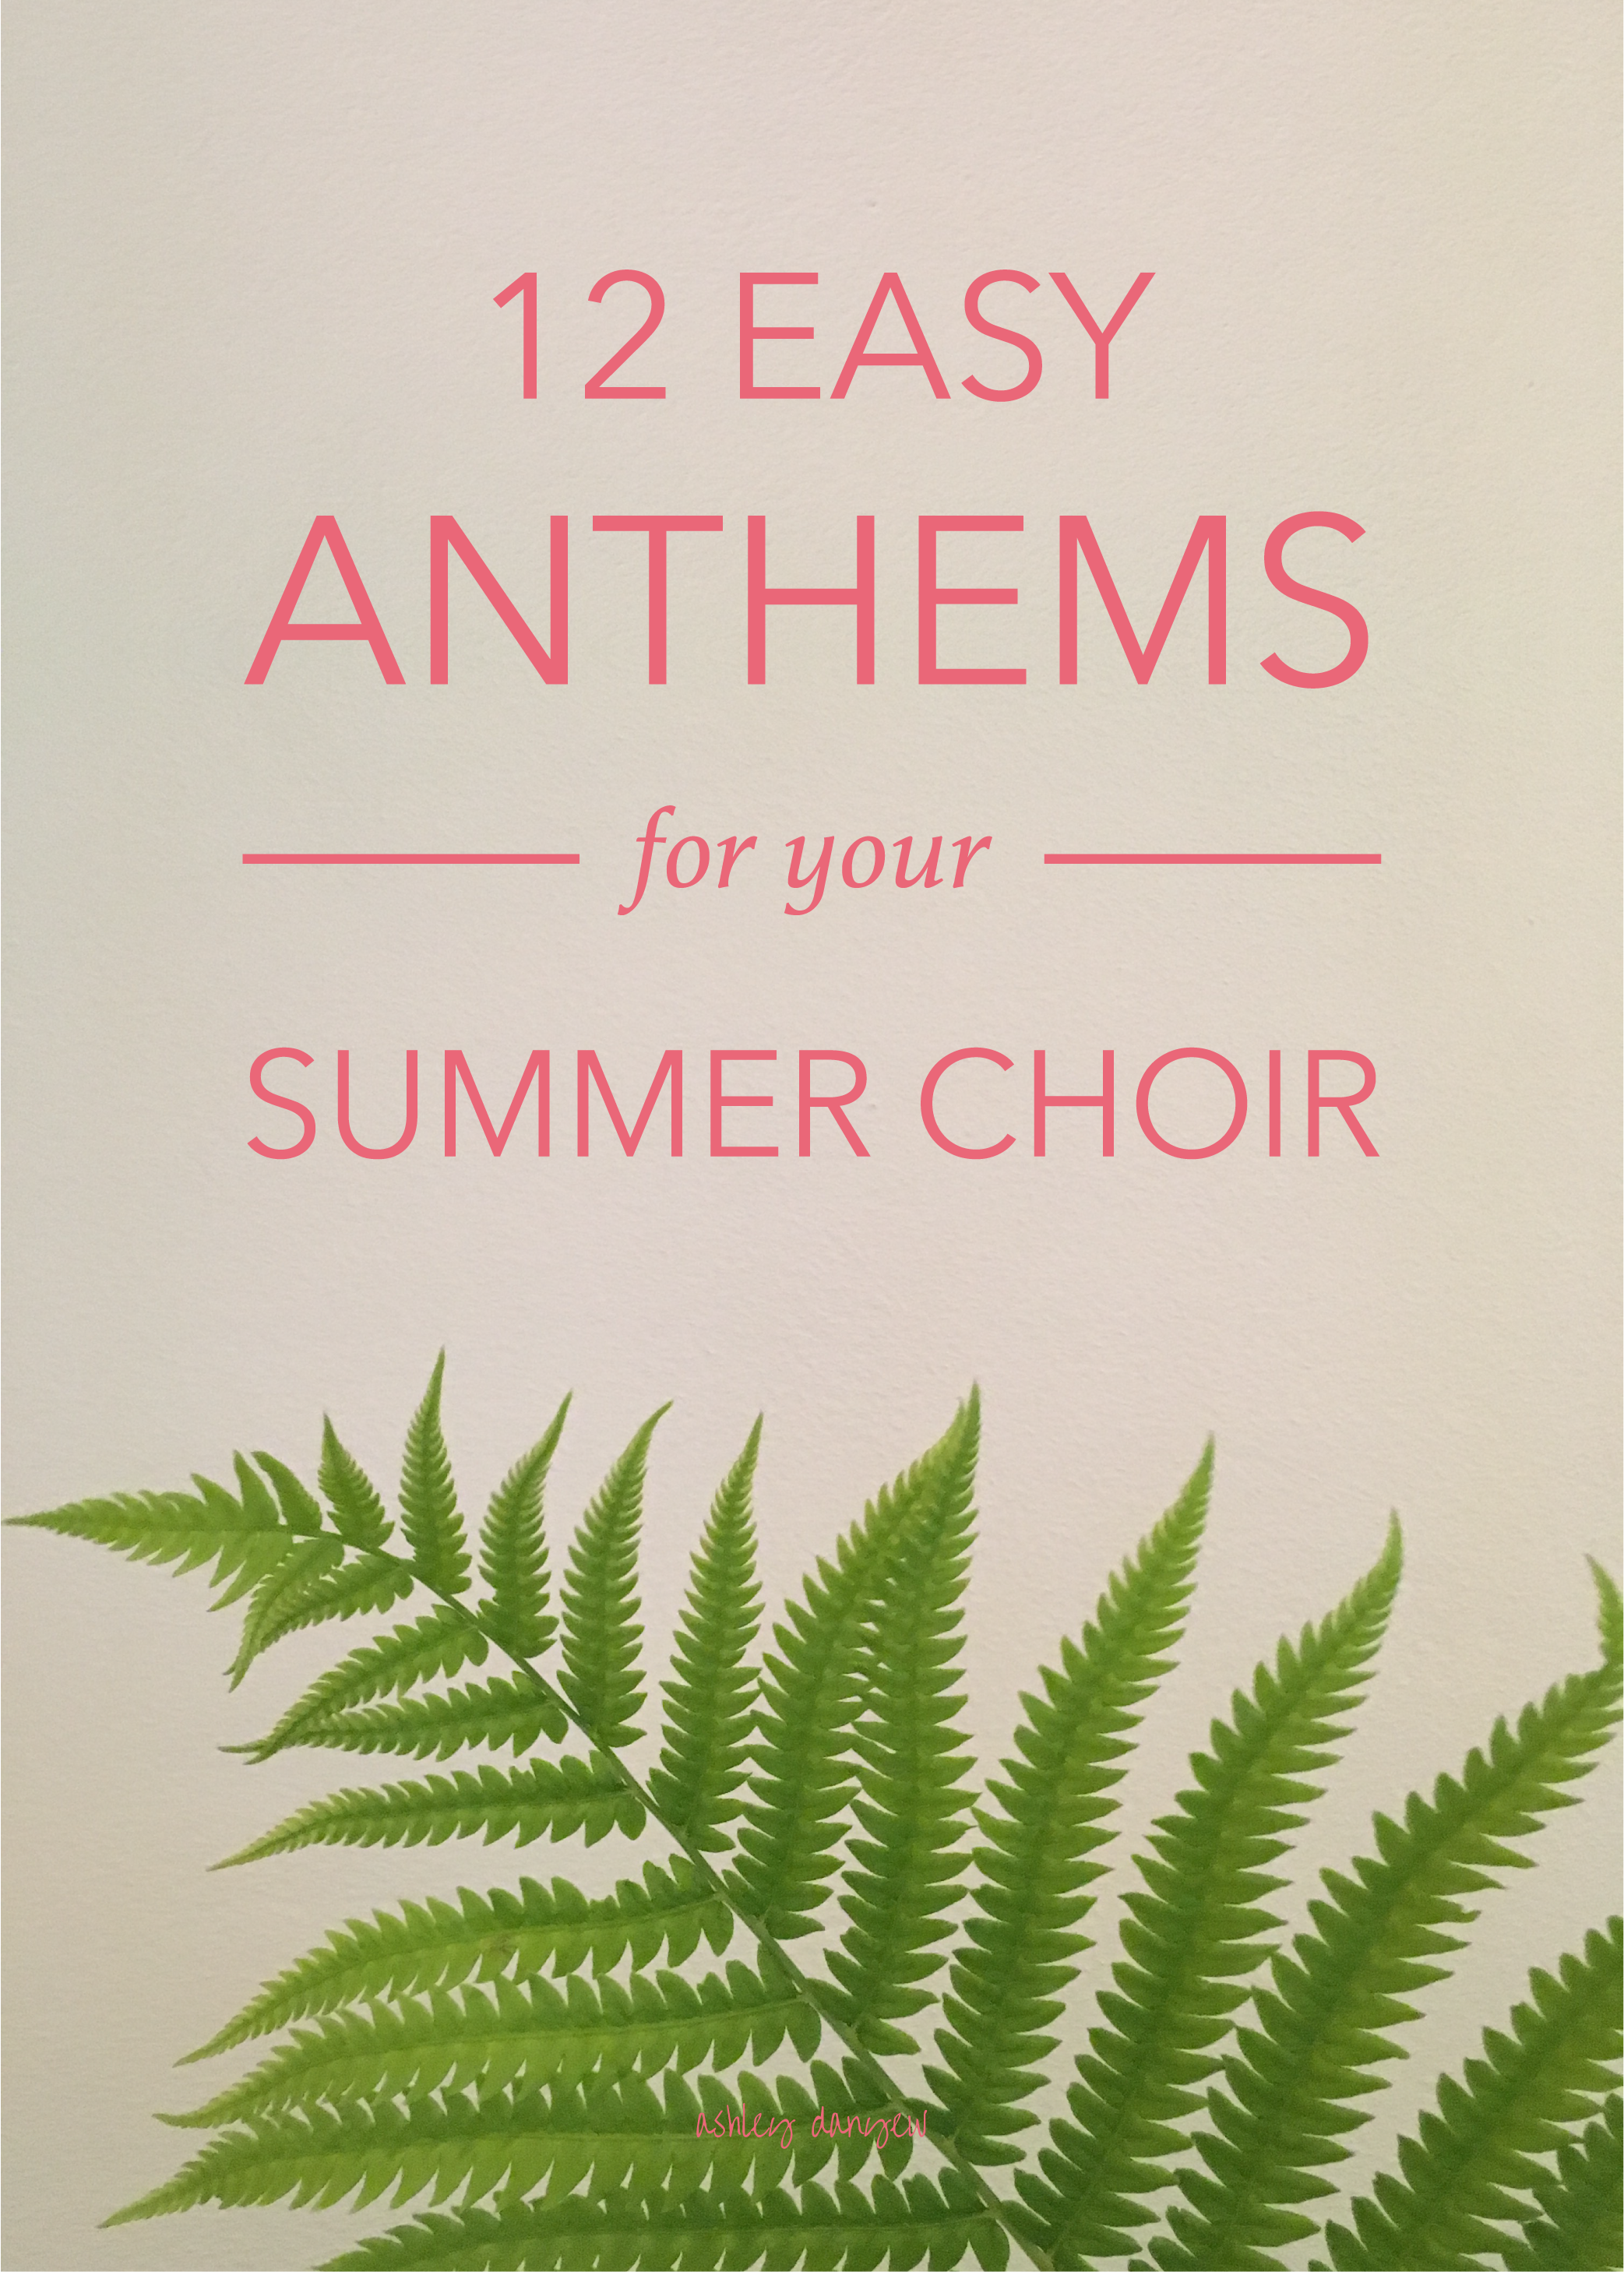 Copy of 12 Easy Anthems for Your Summer Choir